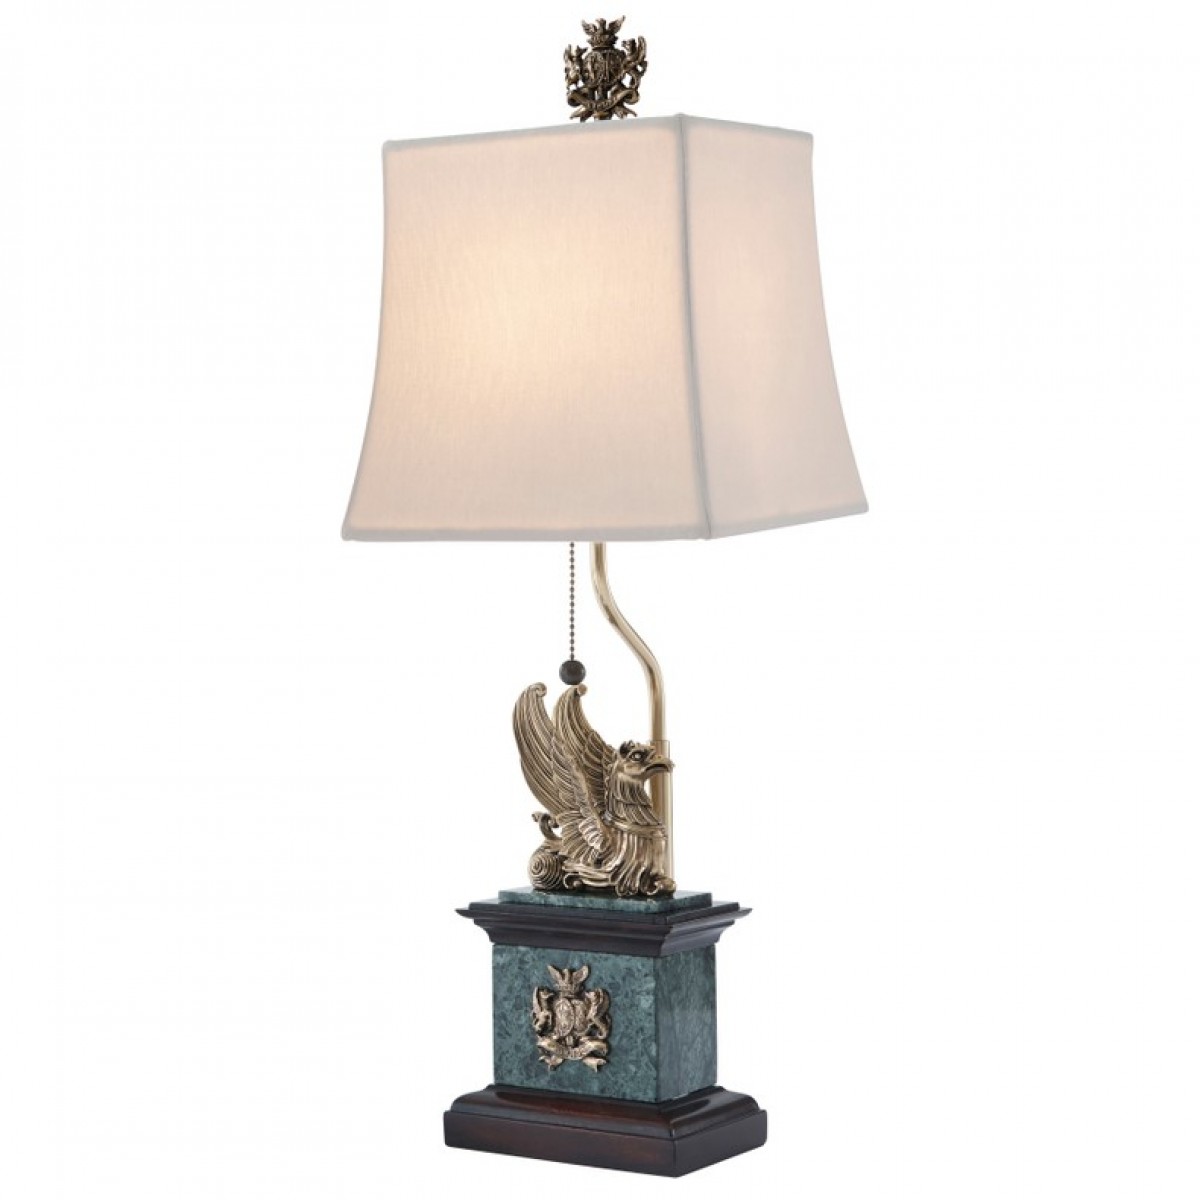 Edmund Right Table Lamp | Highlight image